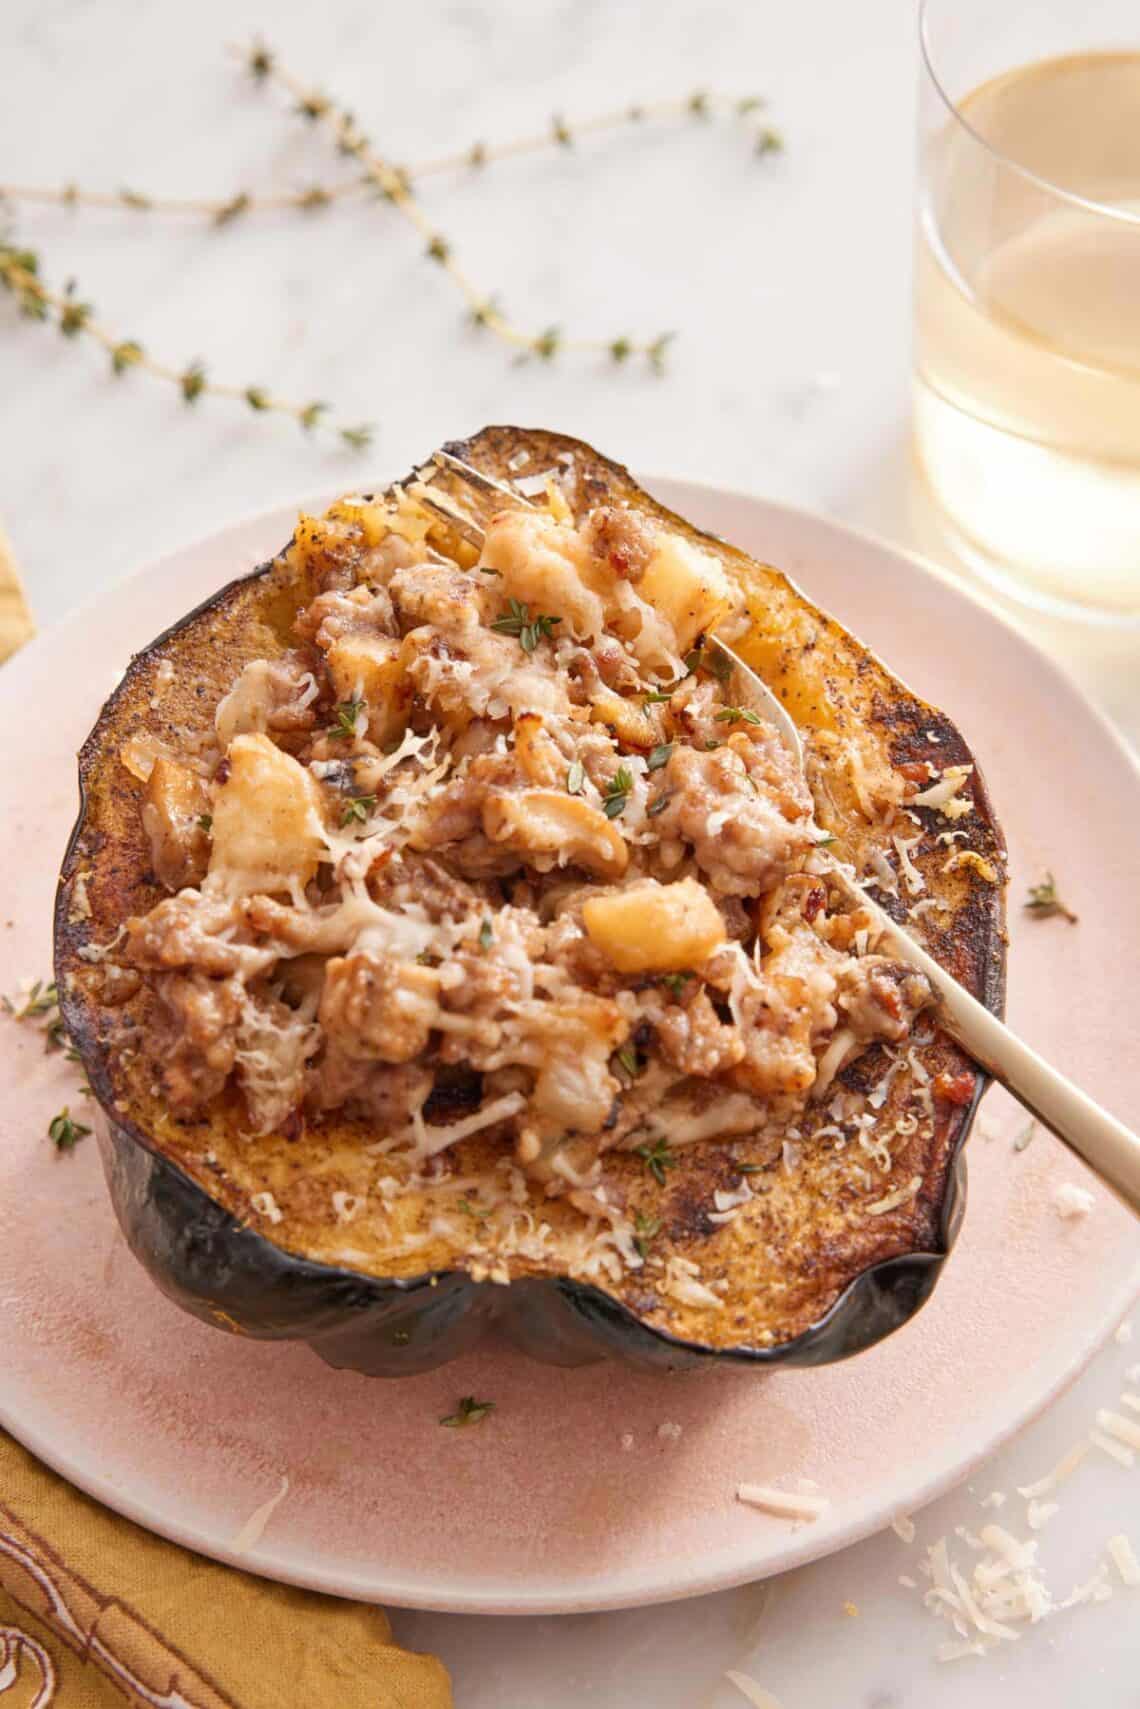 A plate with a serving of stuffed acorn squash with a fork inside. Glass of wine and thyme in the background.